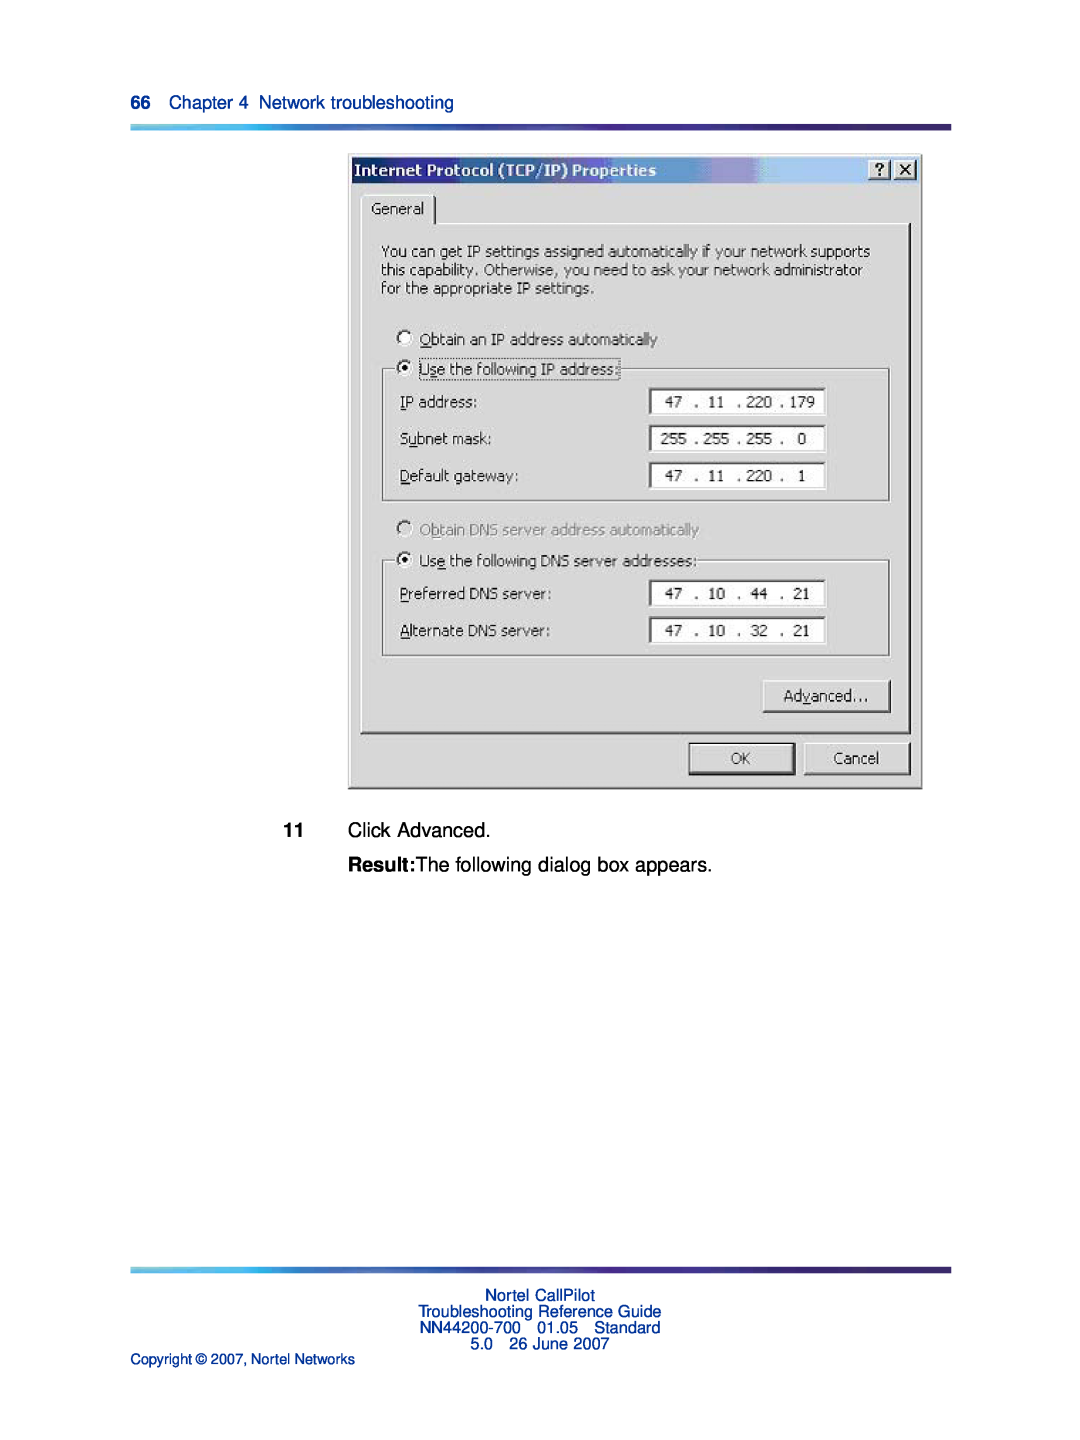 Nortel Networks NN44200-700 manual Click Advanced ResultThe following dialog box appears, Network troubleshooting 